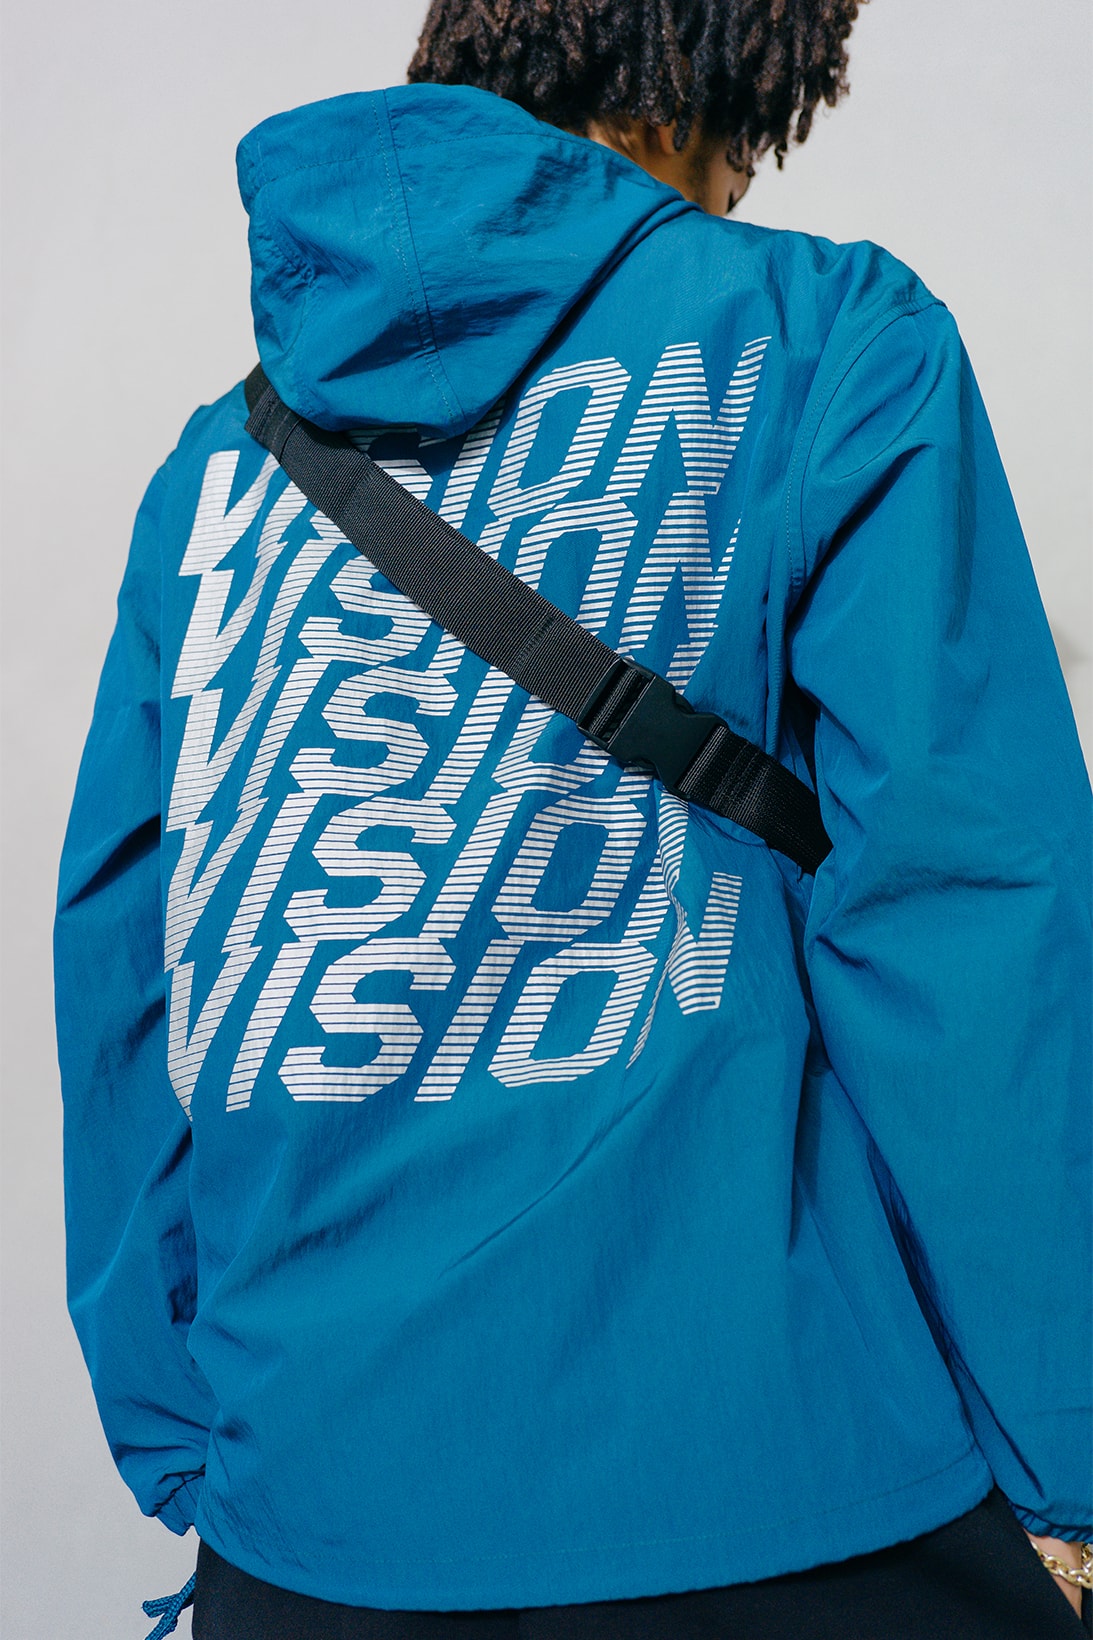 Vision Street Wear Topman Capsule Collection 2017 October Release Date Info